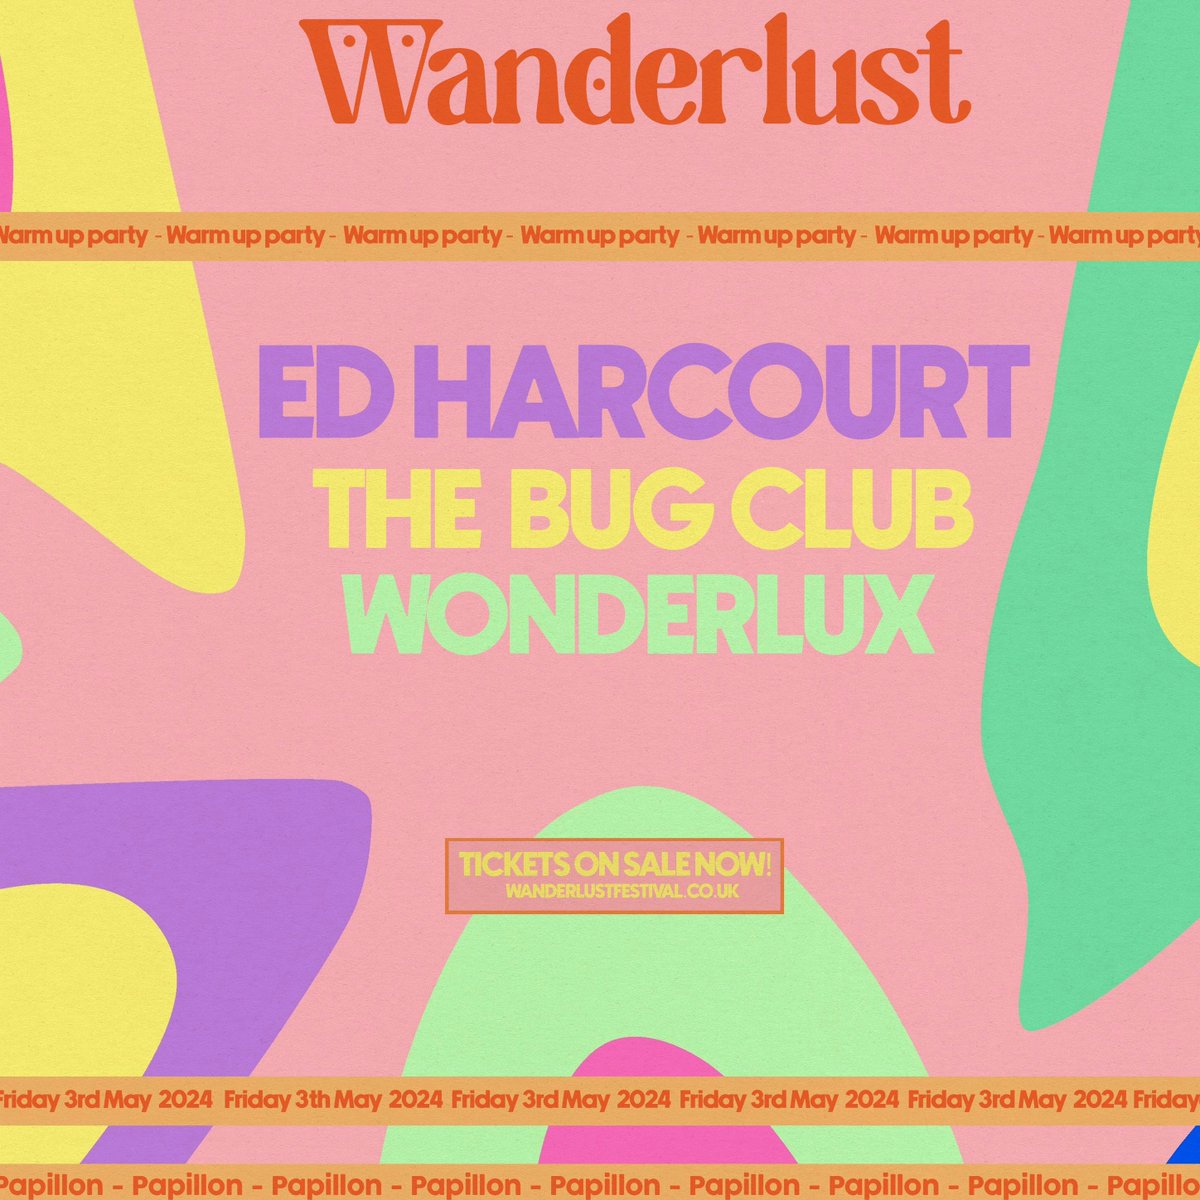 Southampton! Tonight you've got Ed Harcourt @EdHarcourt and The Bug Club @thebugclubband at Papillon - final few Wanderlust warm-up tickets here >> allgigs.co.uk/view/artist/21…